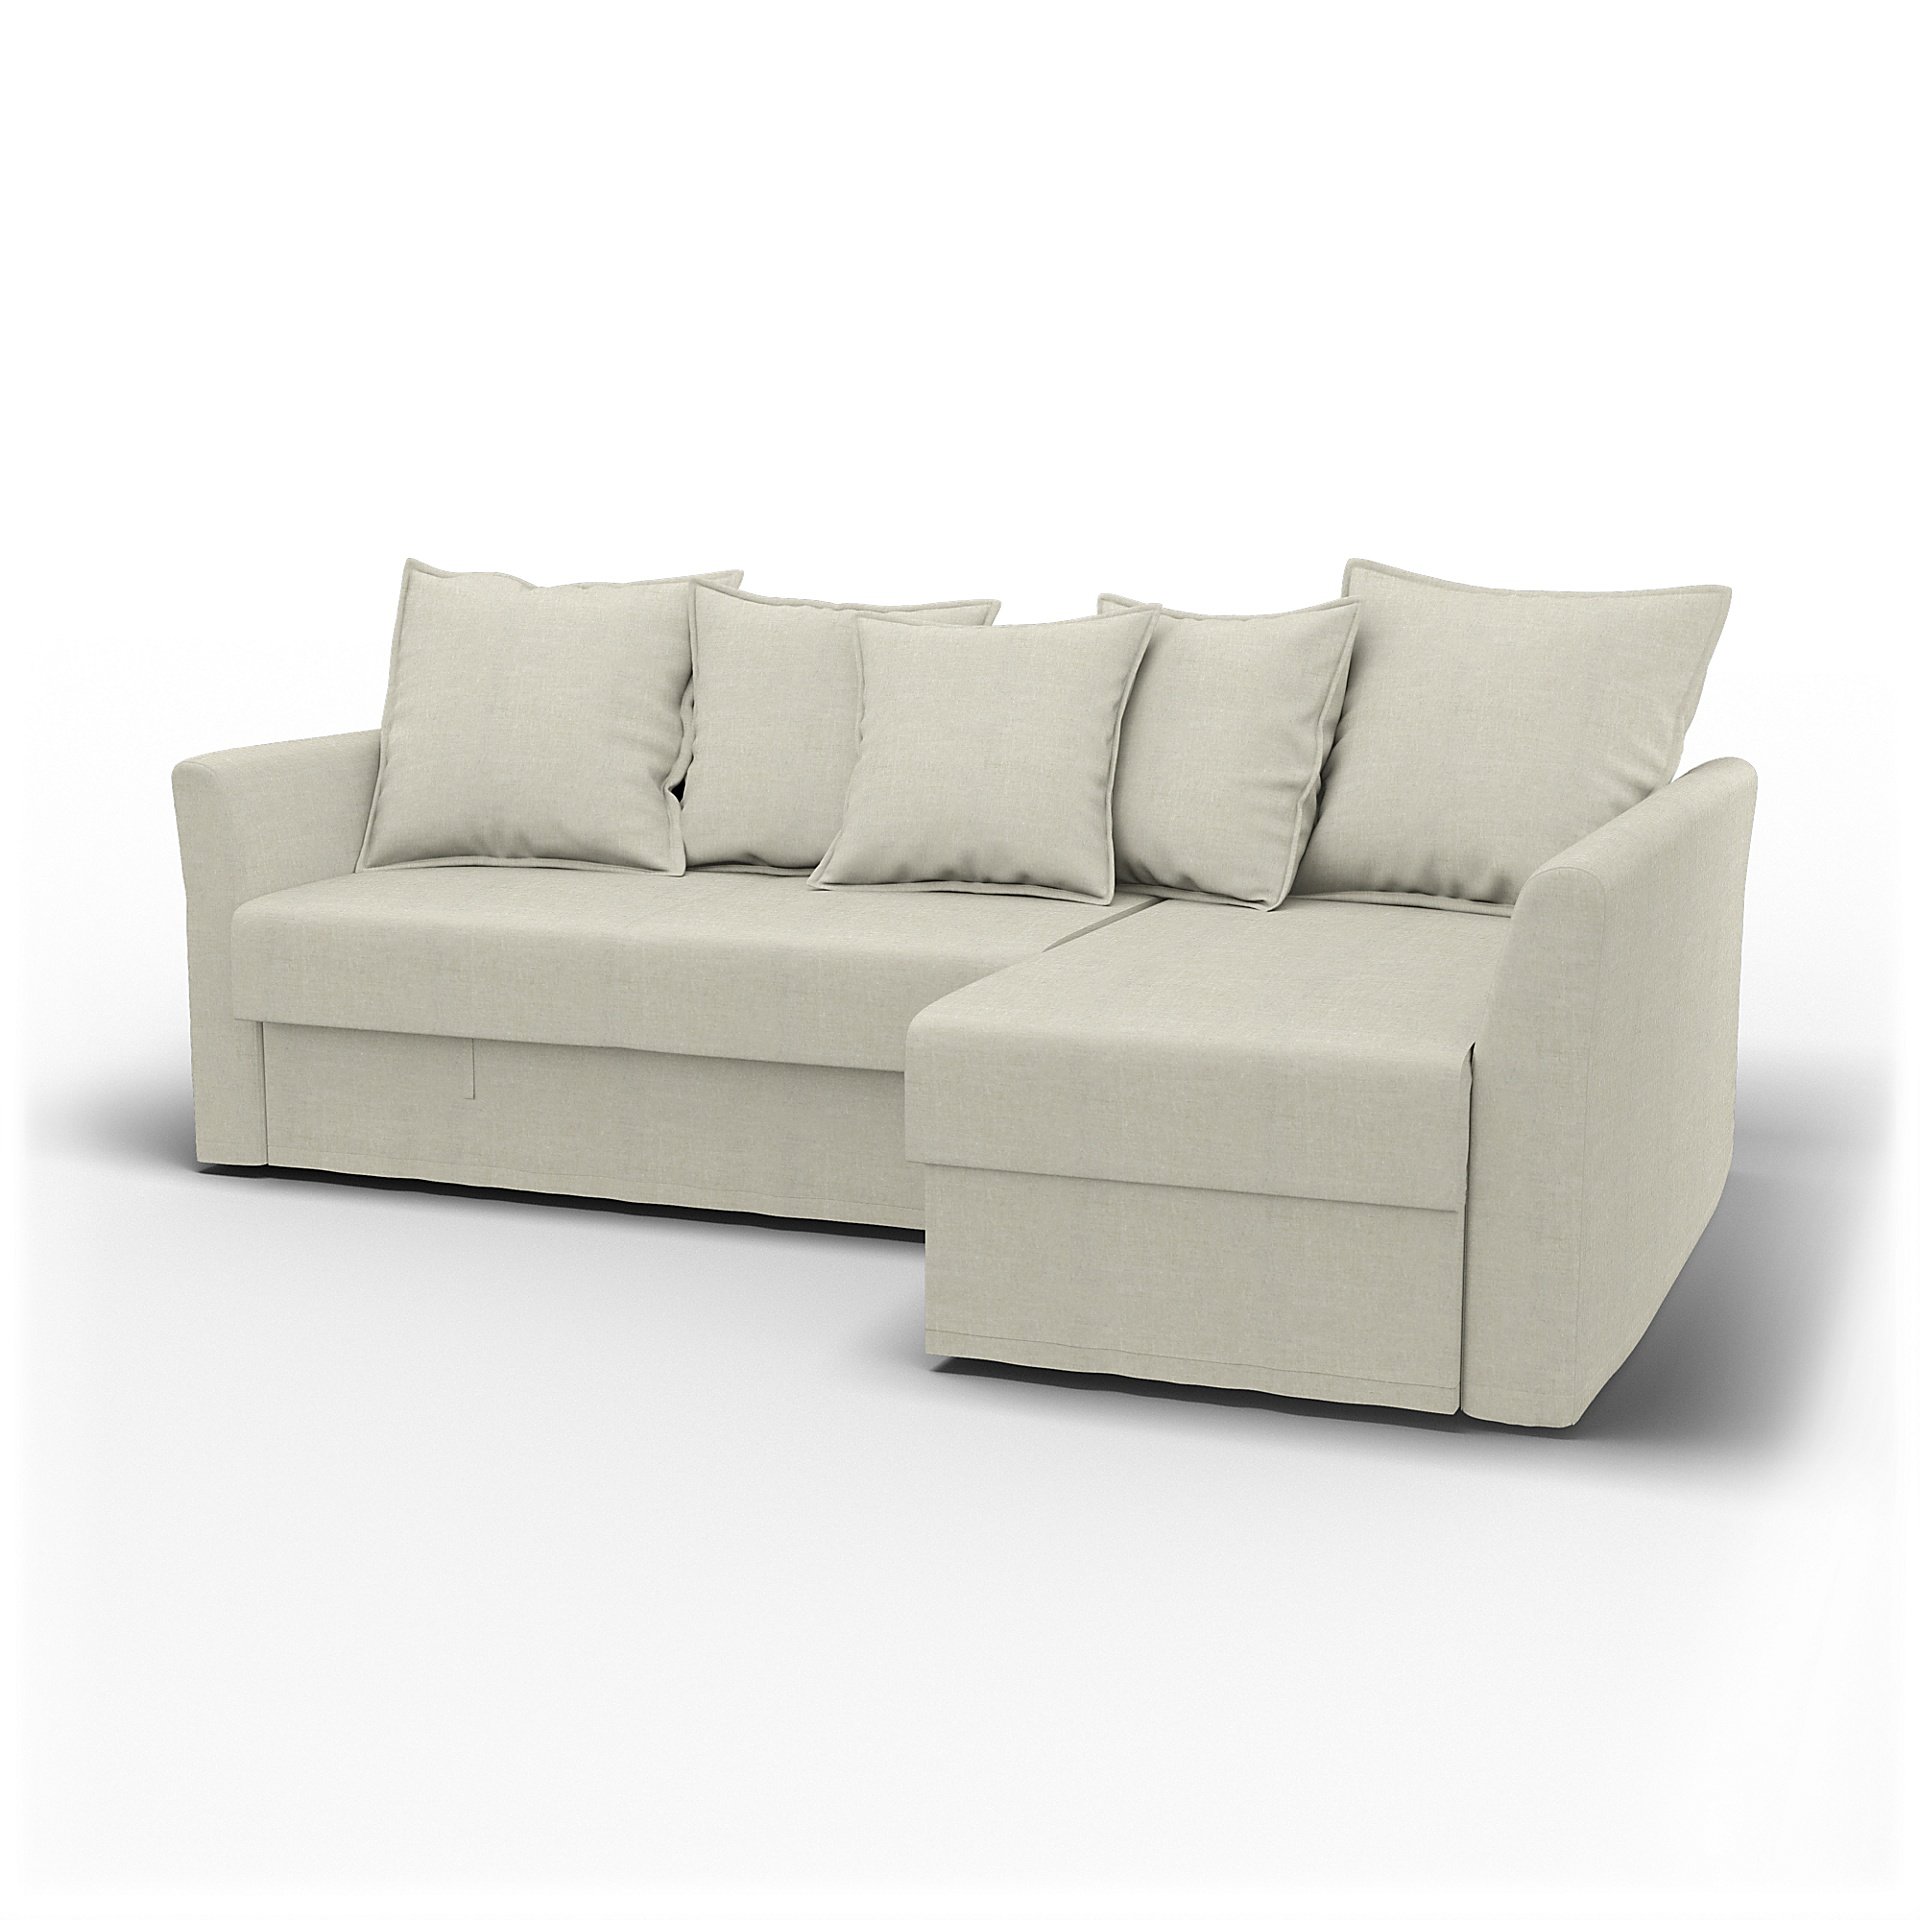 IKEA - Holmsund Sofabed with Chaiselongue, Natural, Linen - Bemz